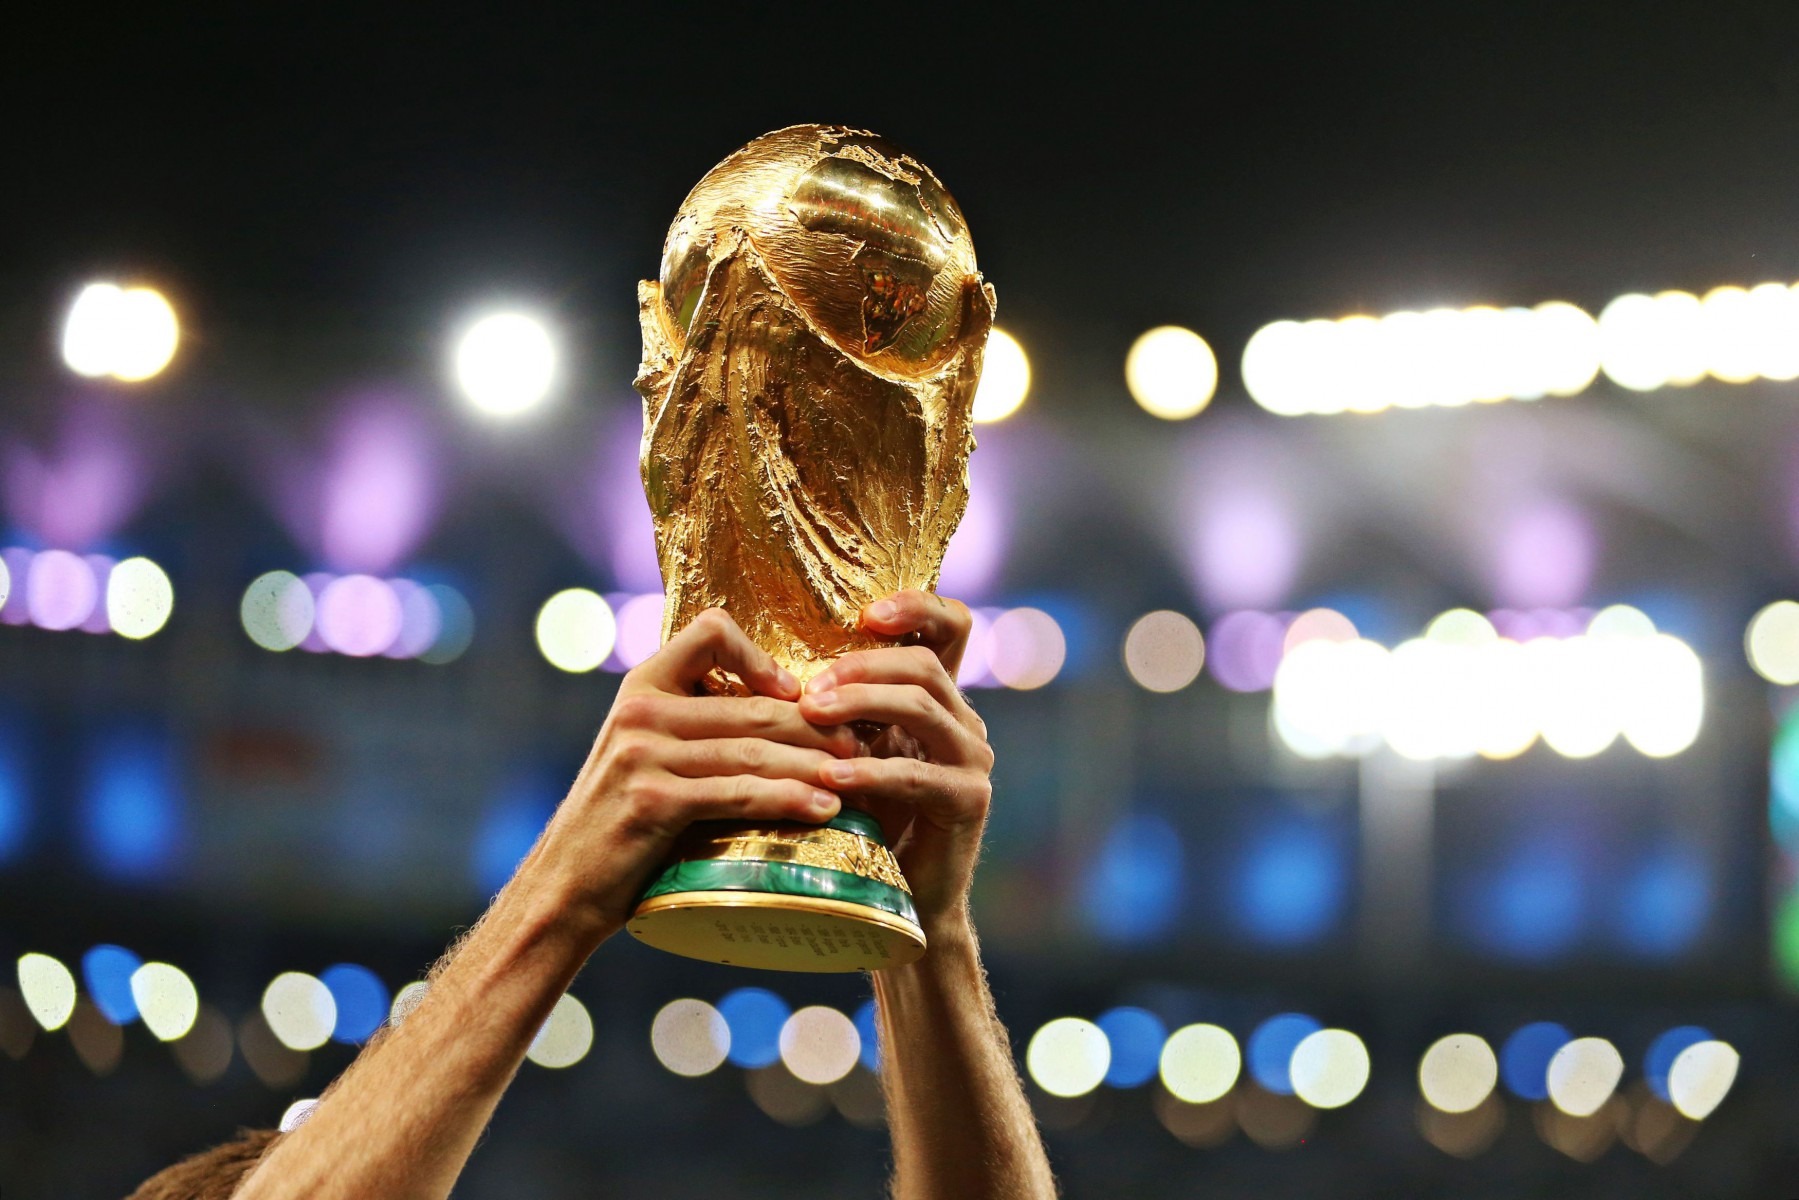 , Premier League to stage games NINE DAYS before start of 2022 World Cup as schedule makes room for winter tournament